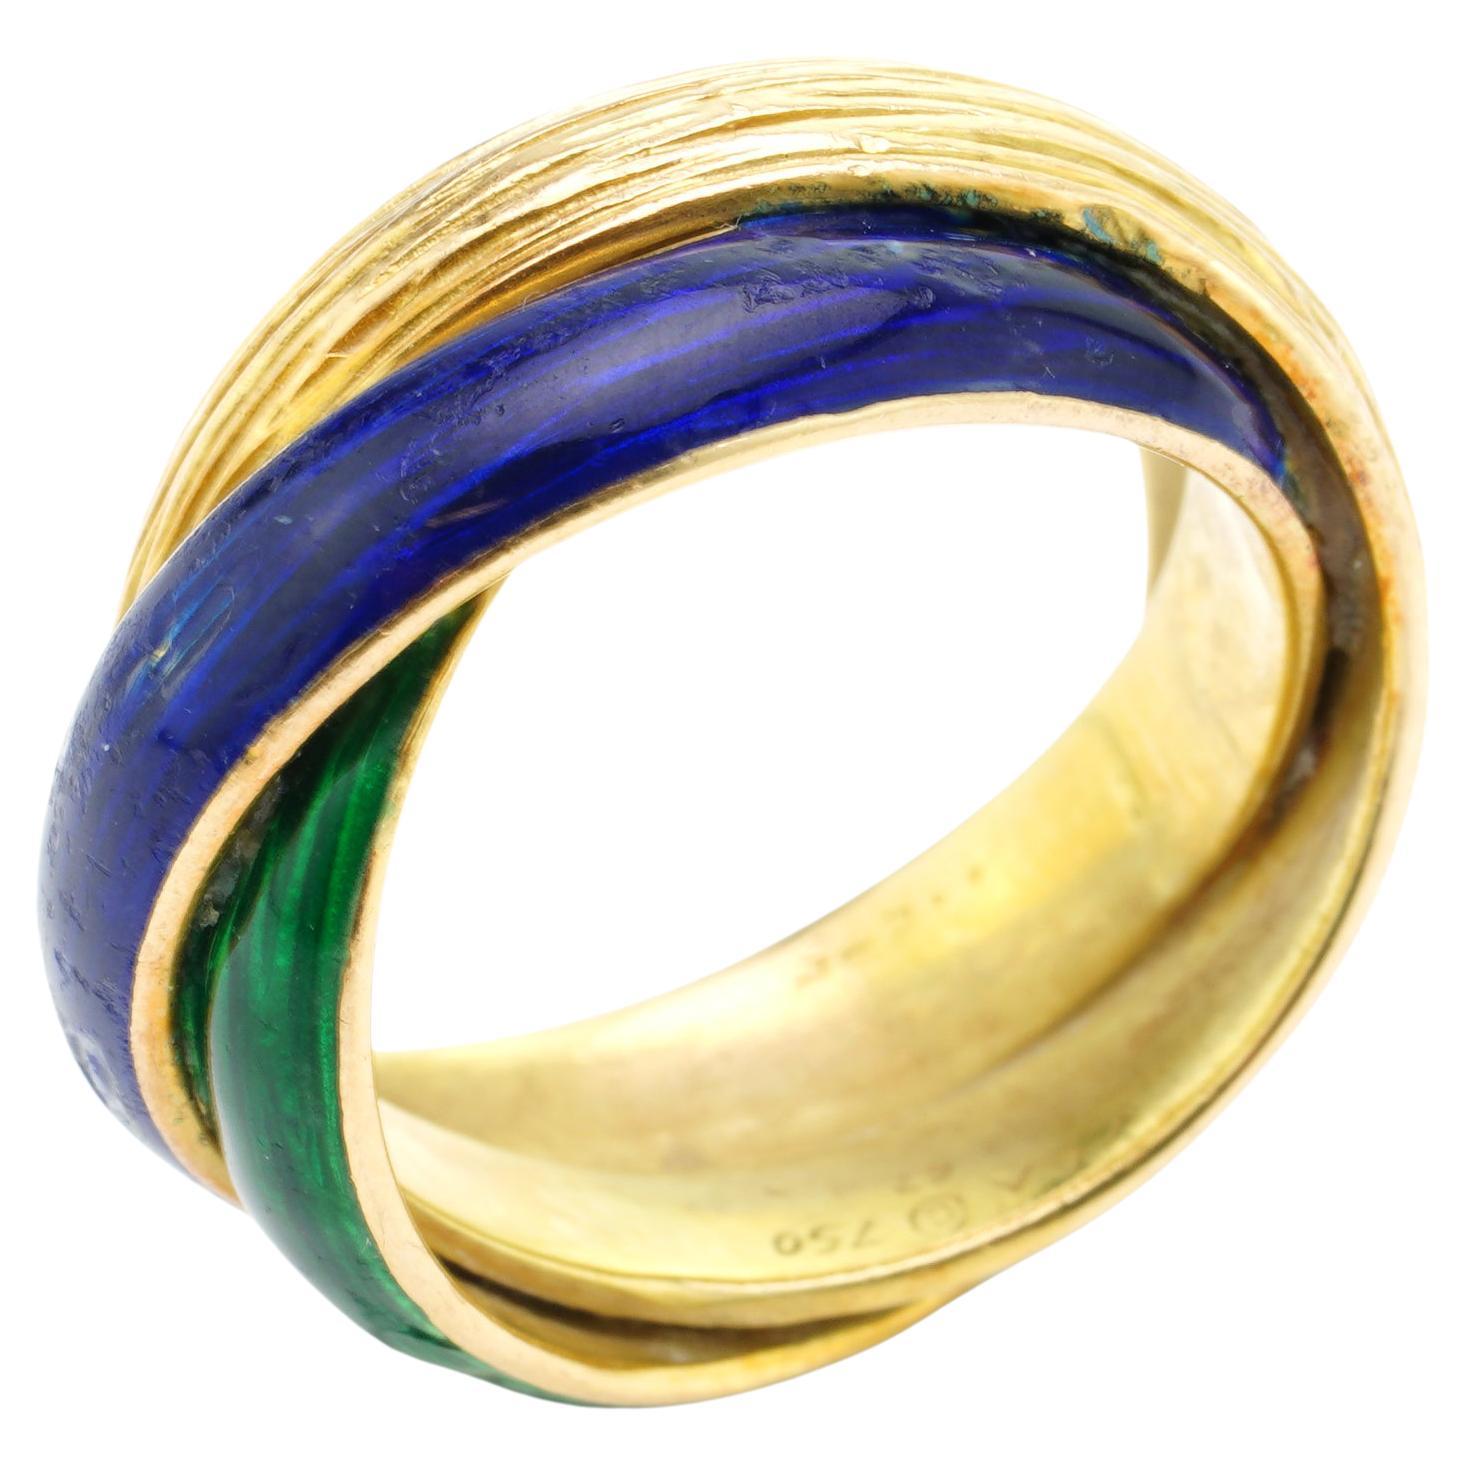 Vintage Van Cleef & Arpels 18kt, Yellow Gold, Twisted Red and Blue Enamel Ring